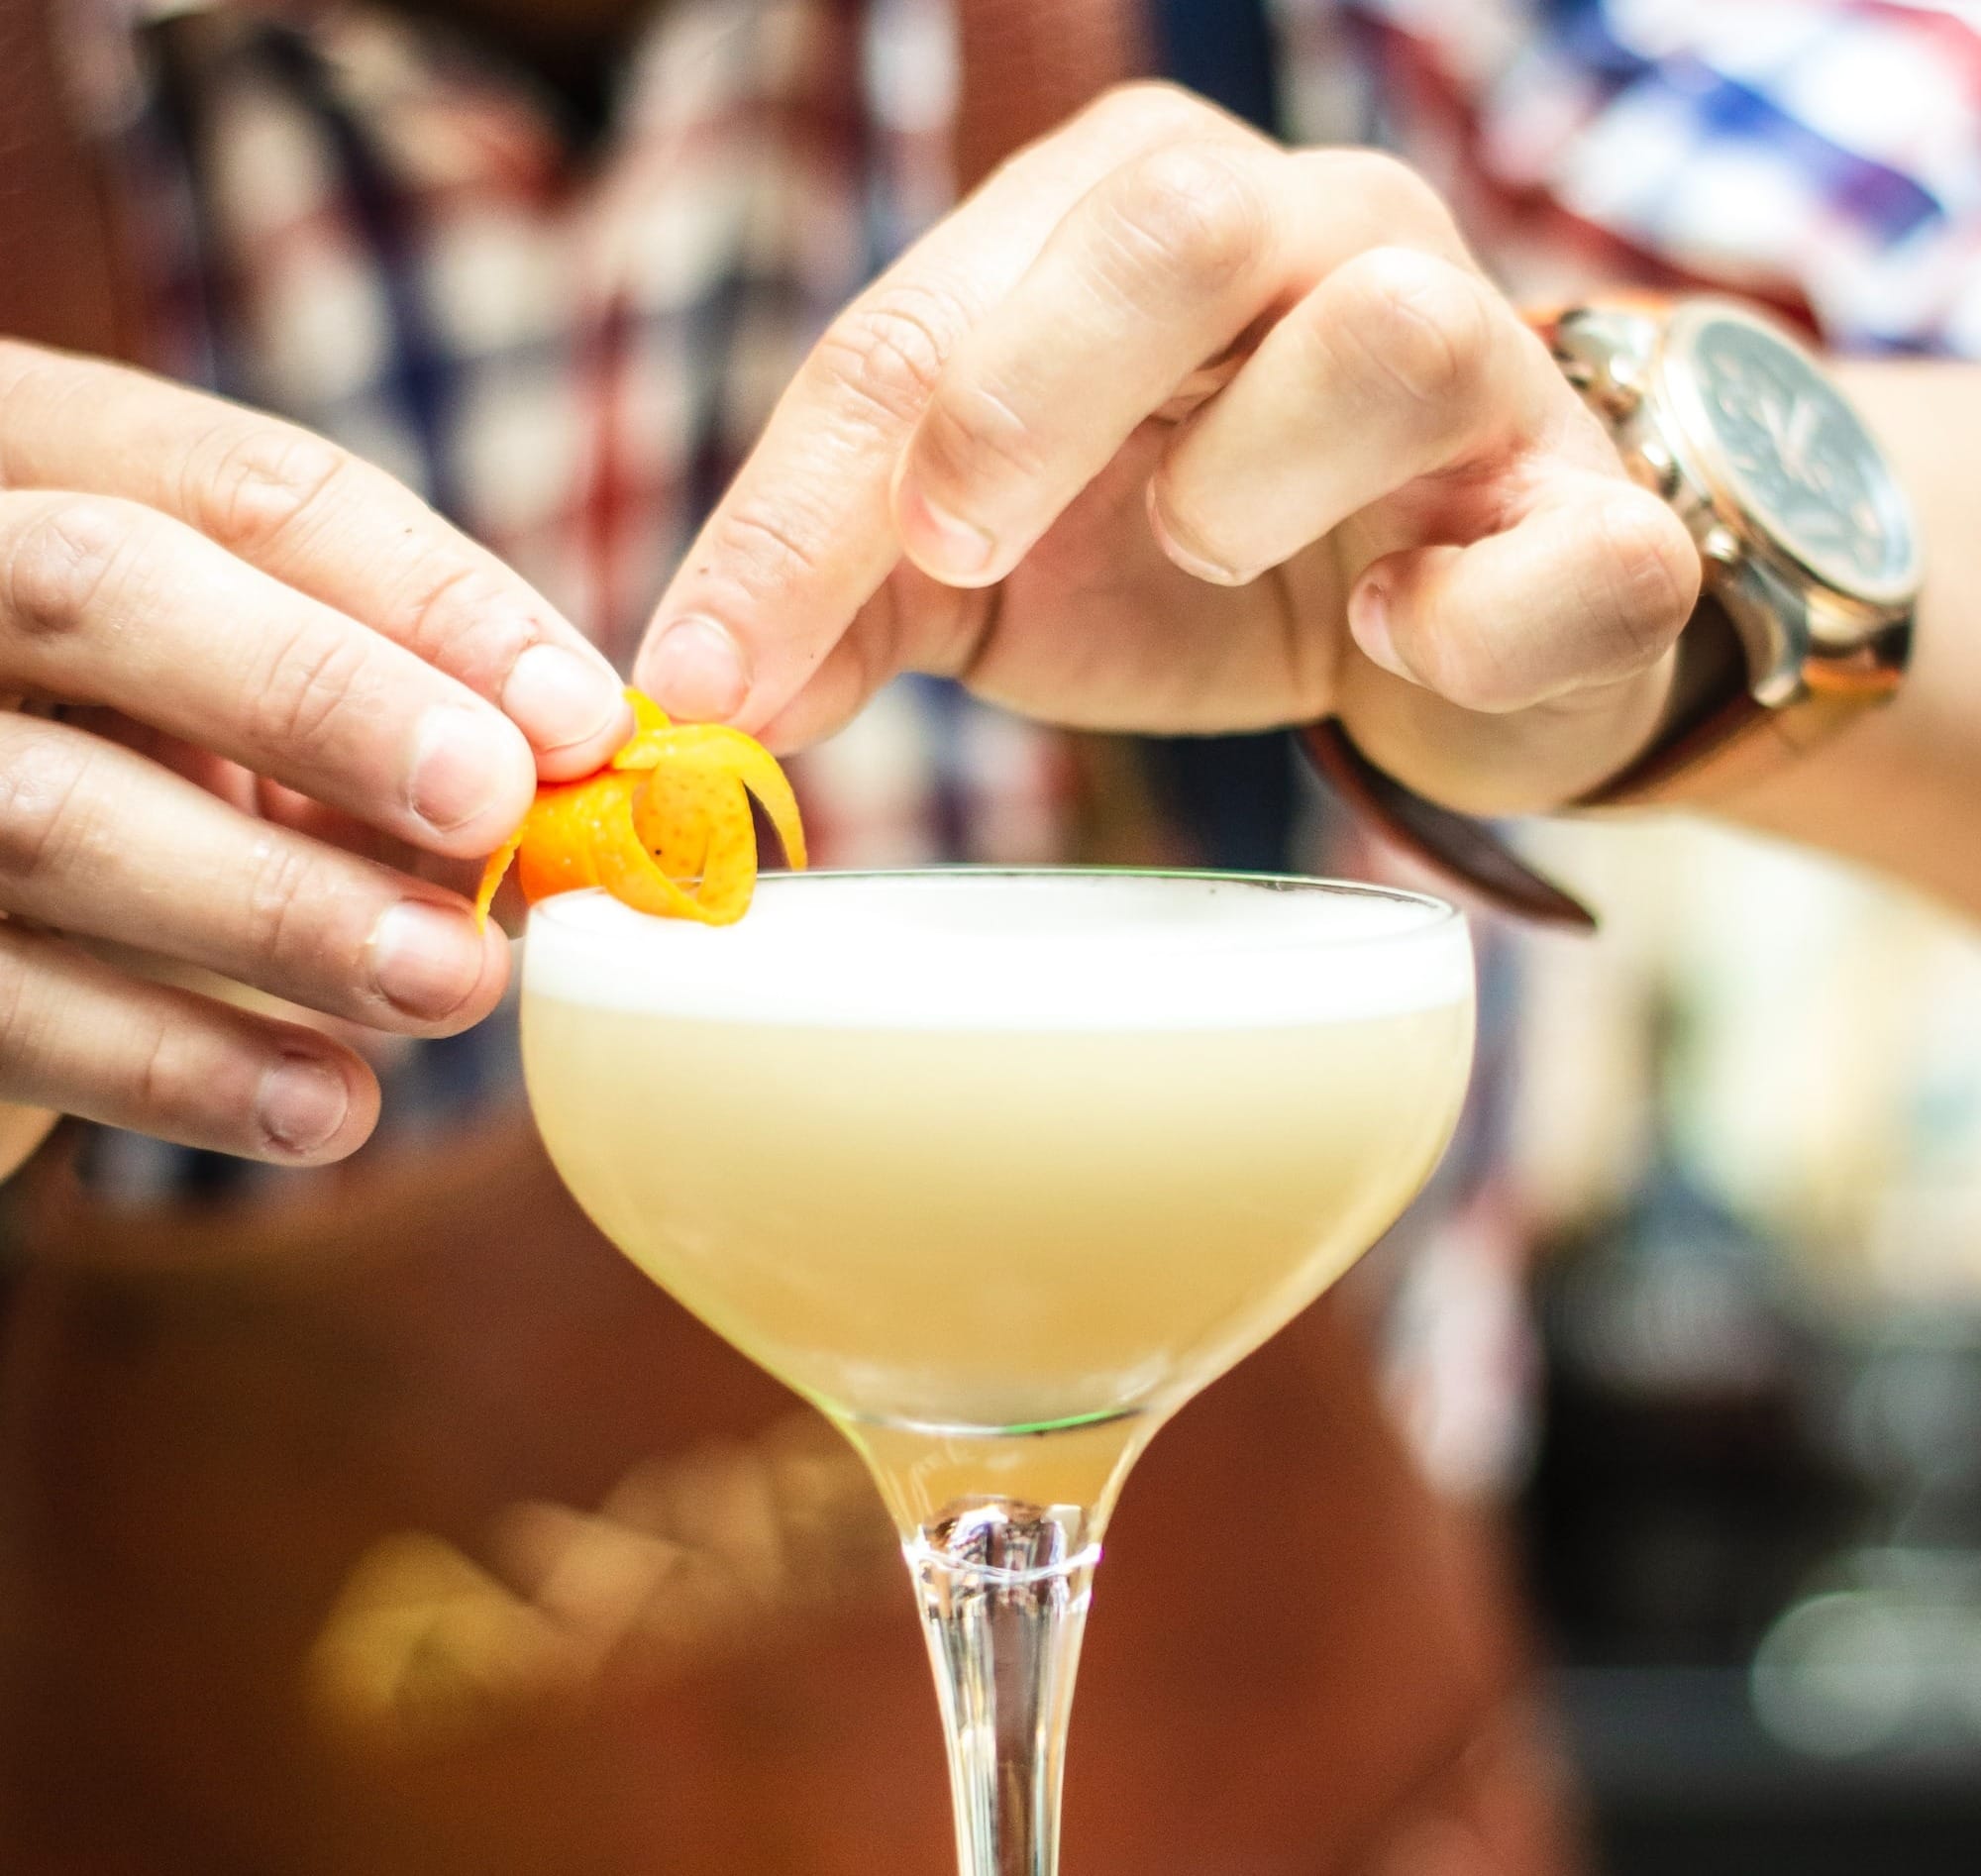 Bartender preparing a delicate Christmas cocktail with an orange peel.